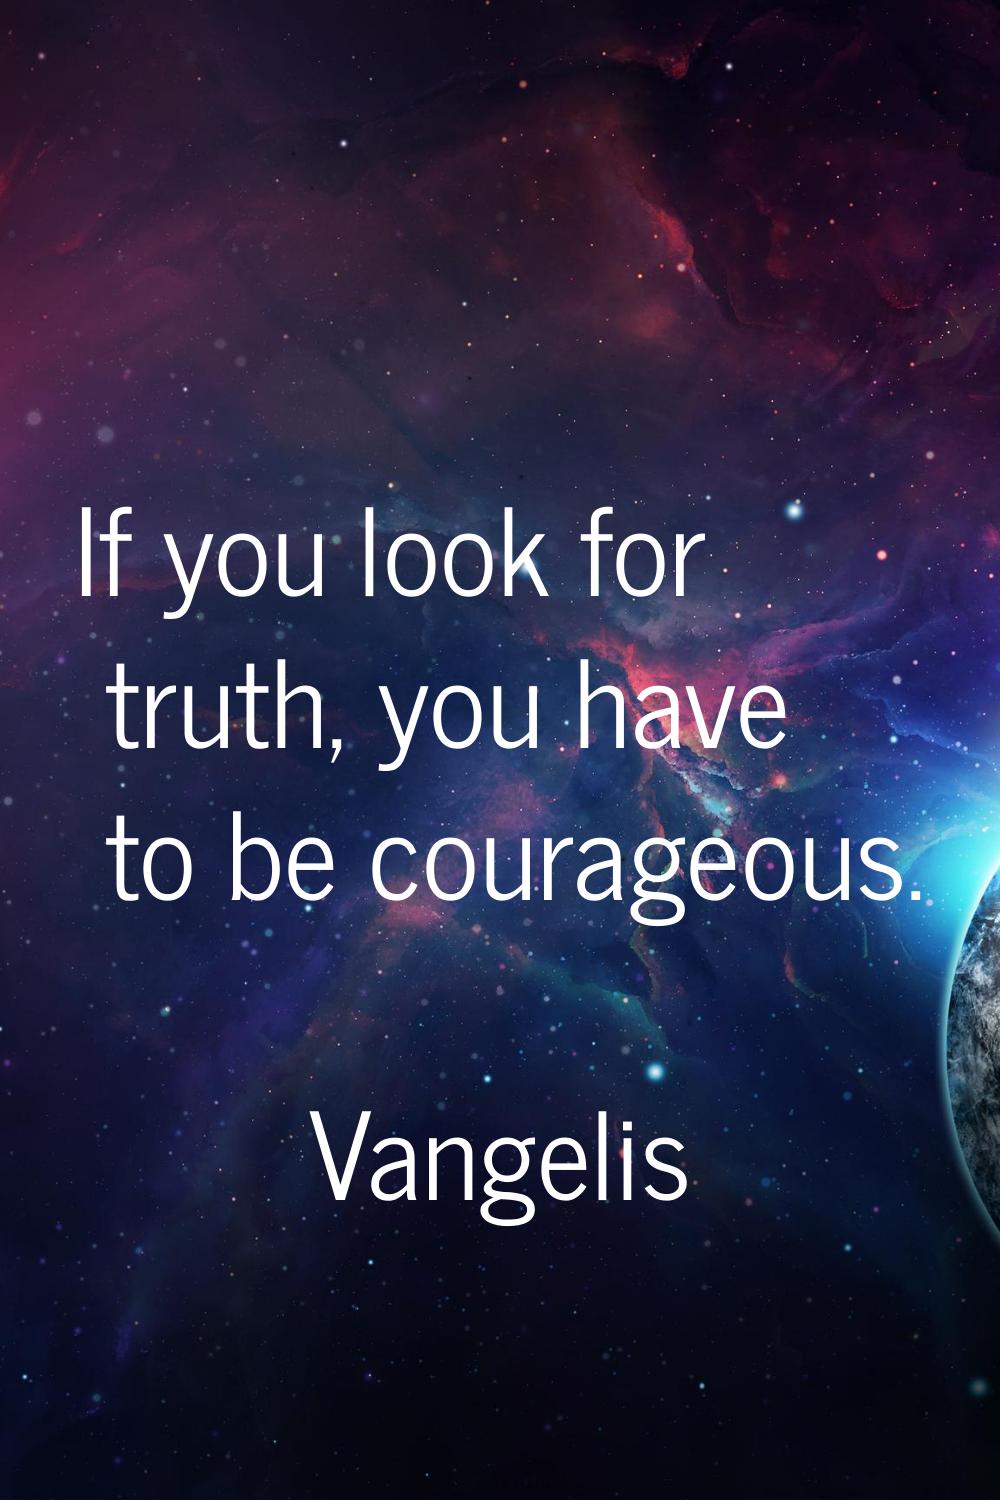 If you look for truth, you have to be courageous.